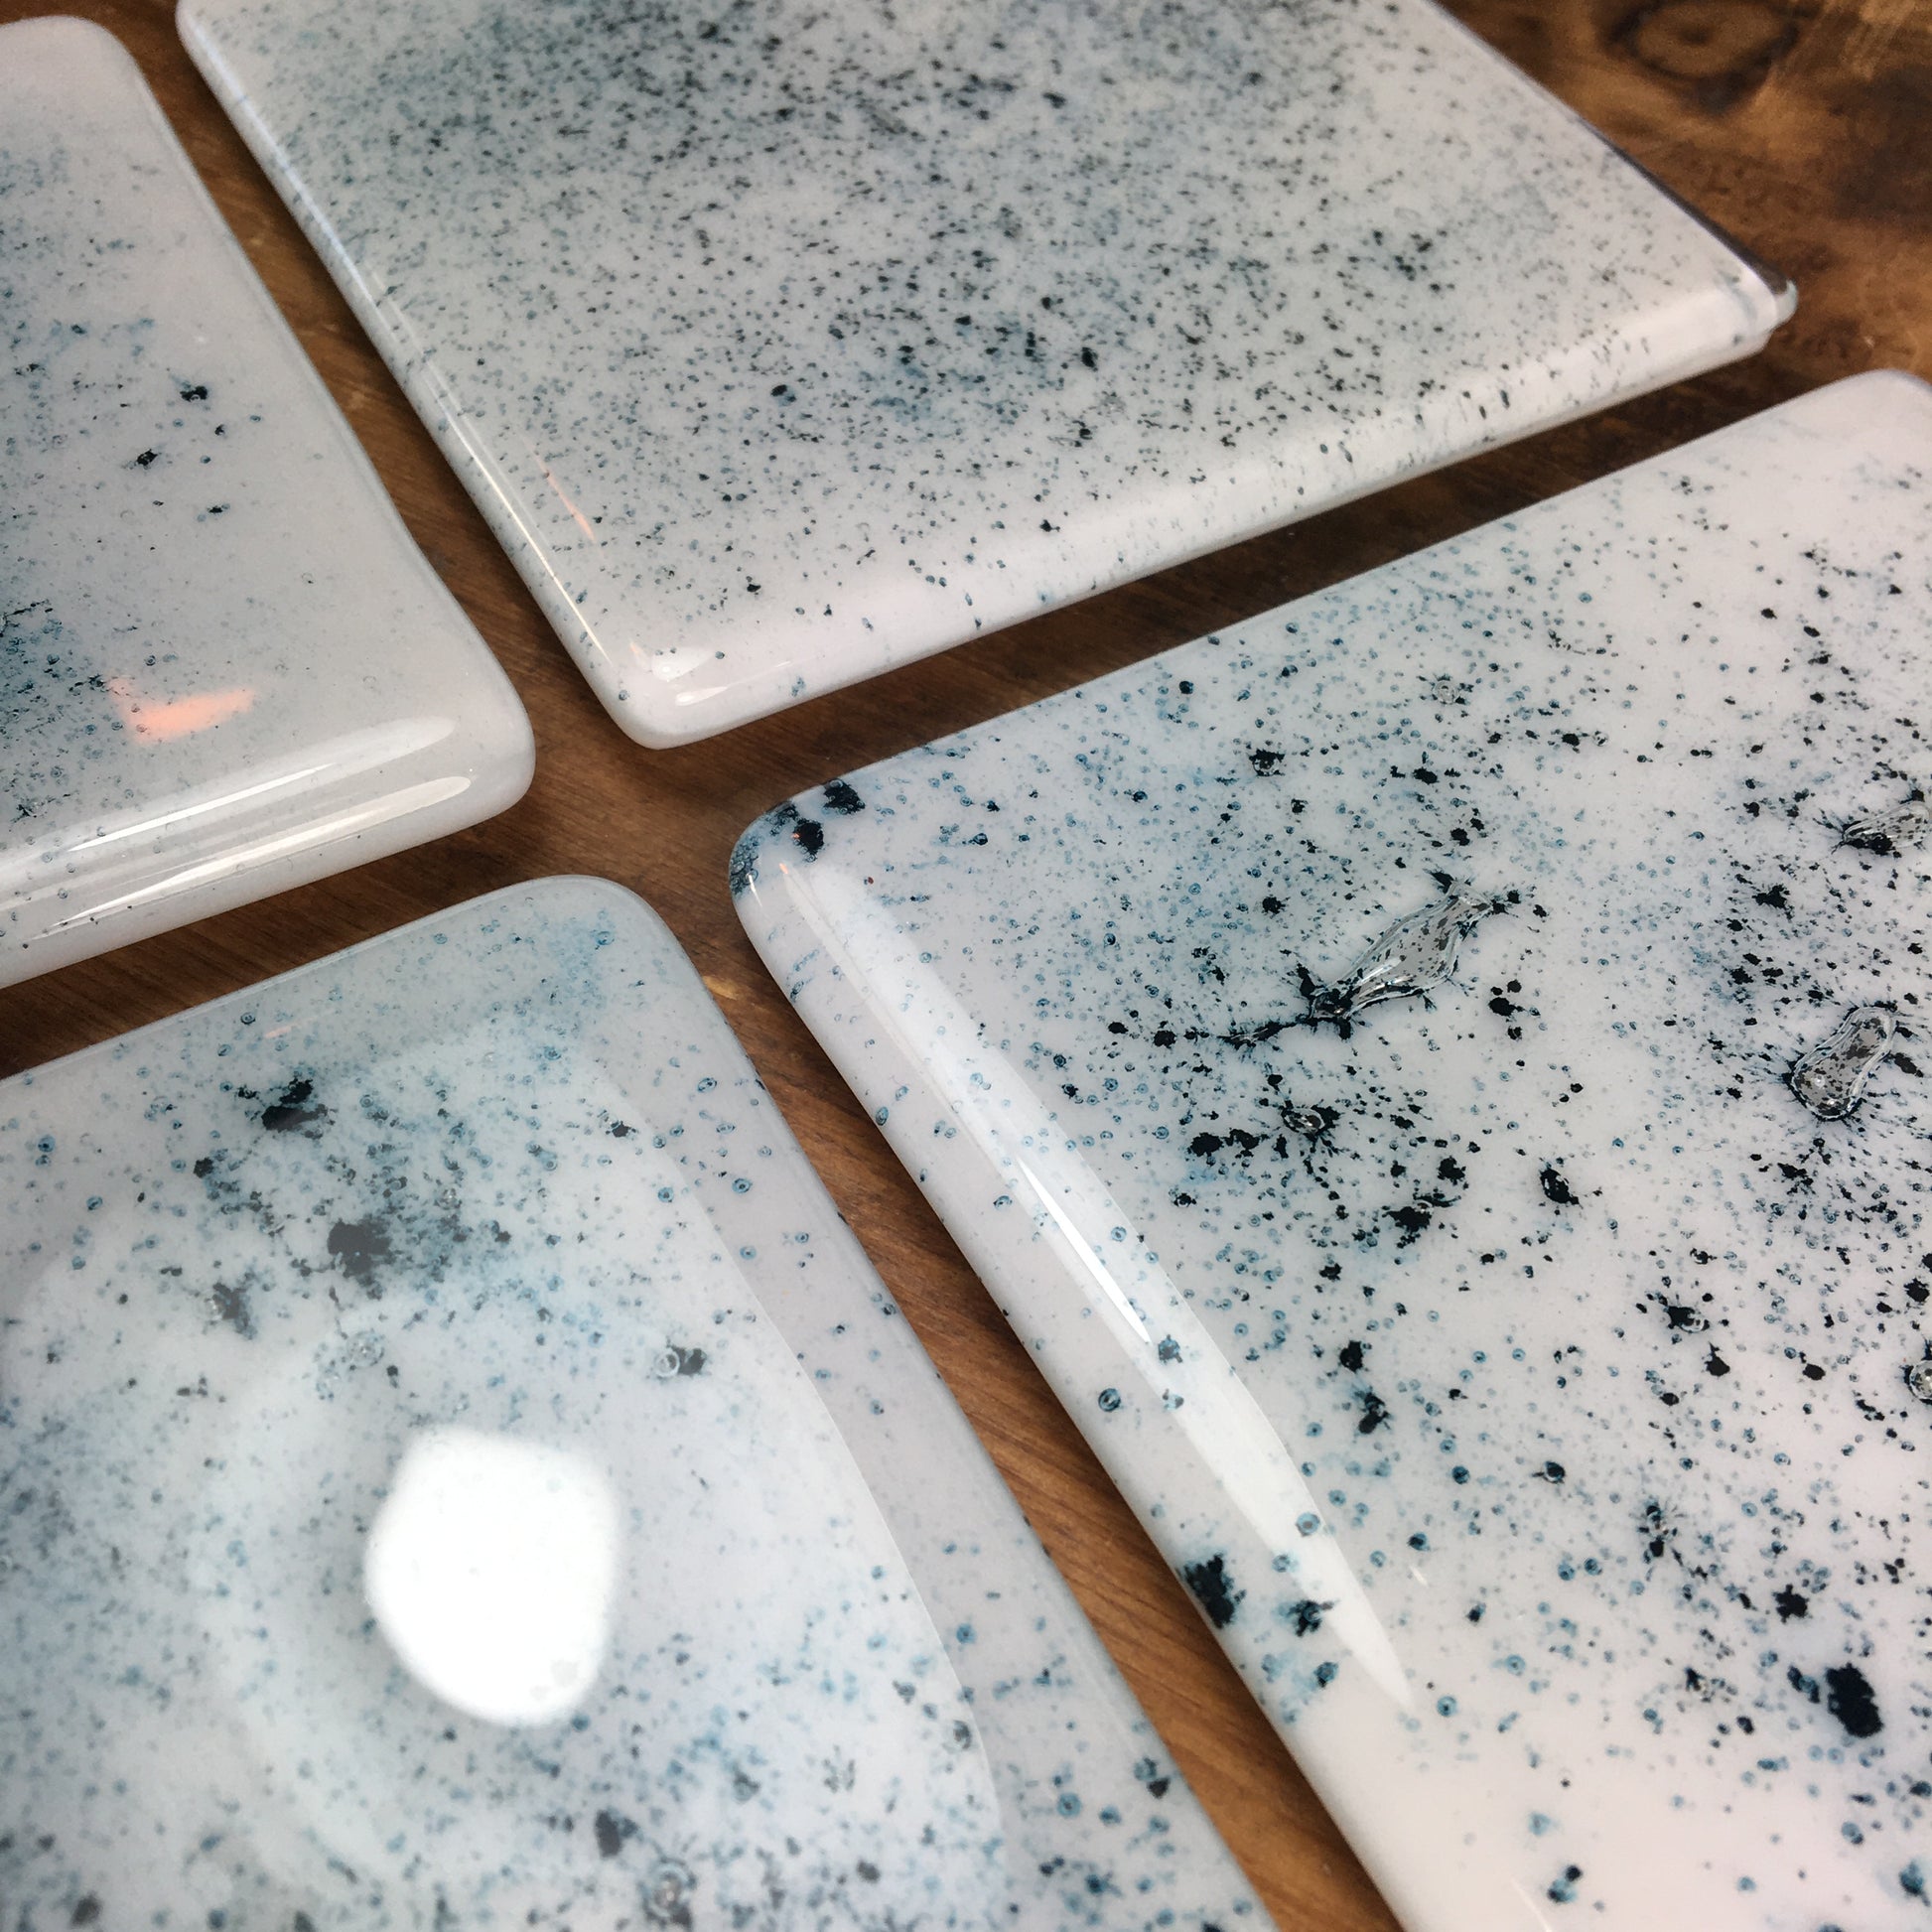 Dadswell Glass, Handmade fused glass coasters, copper oxide powder between glass creating an aqua spray of colour. Beautiful coasters to adorn your home. Made at Glass Designs a Bristol Gift shop.